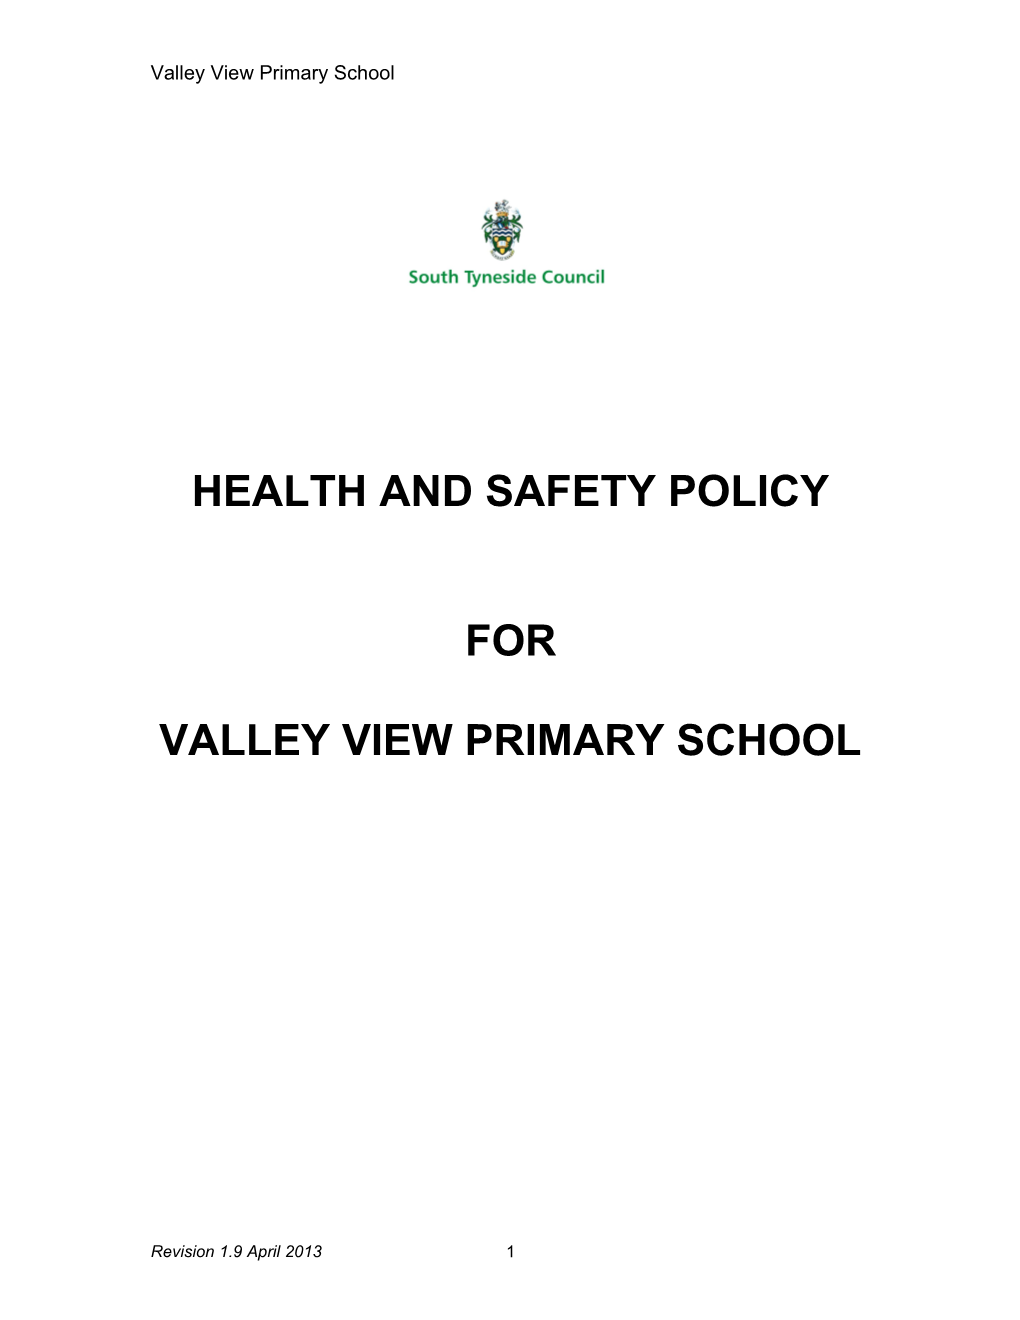 Model H&S Policy for Schools